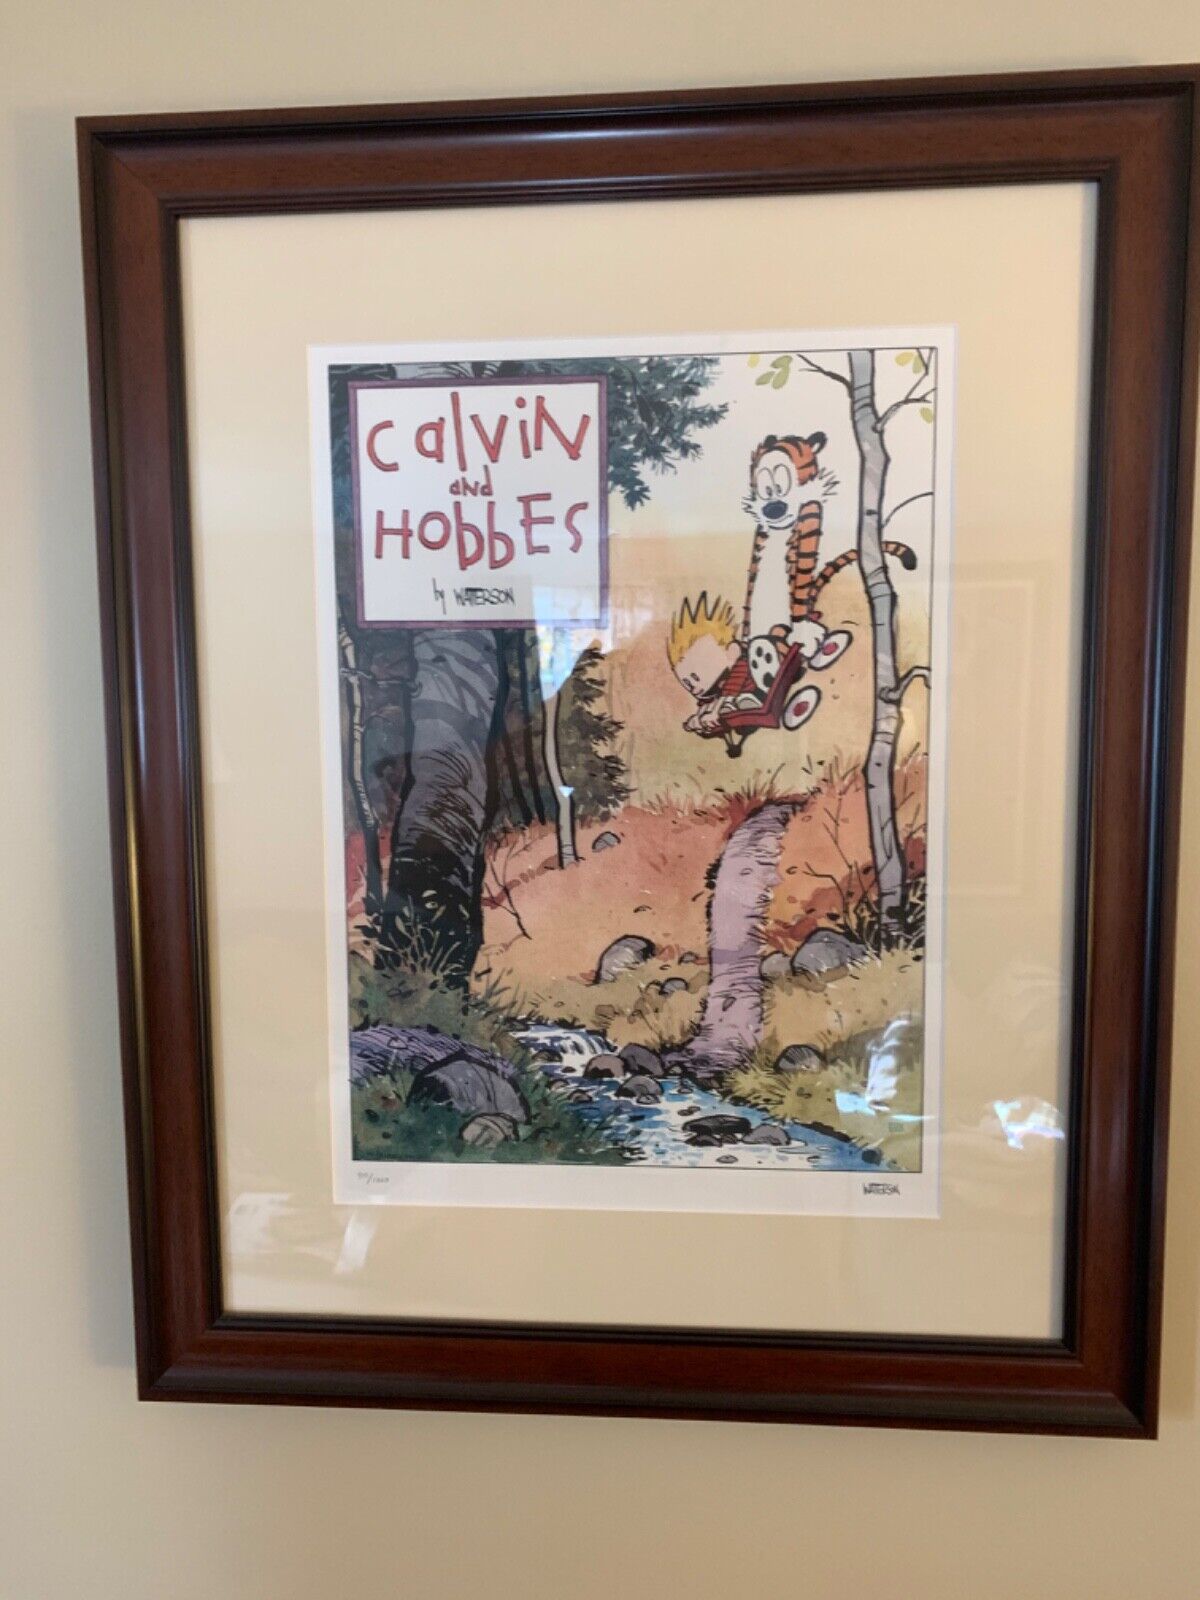 Calvin and Hobbes signed and numbered Lithograph (1992)